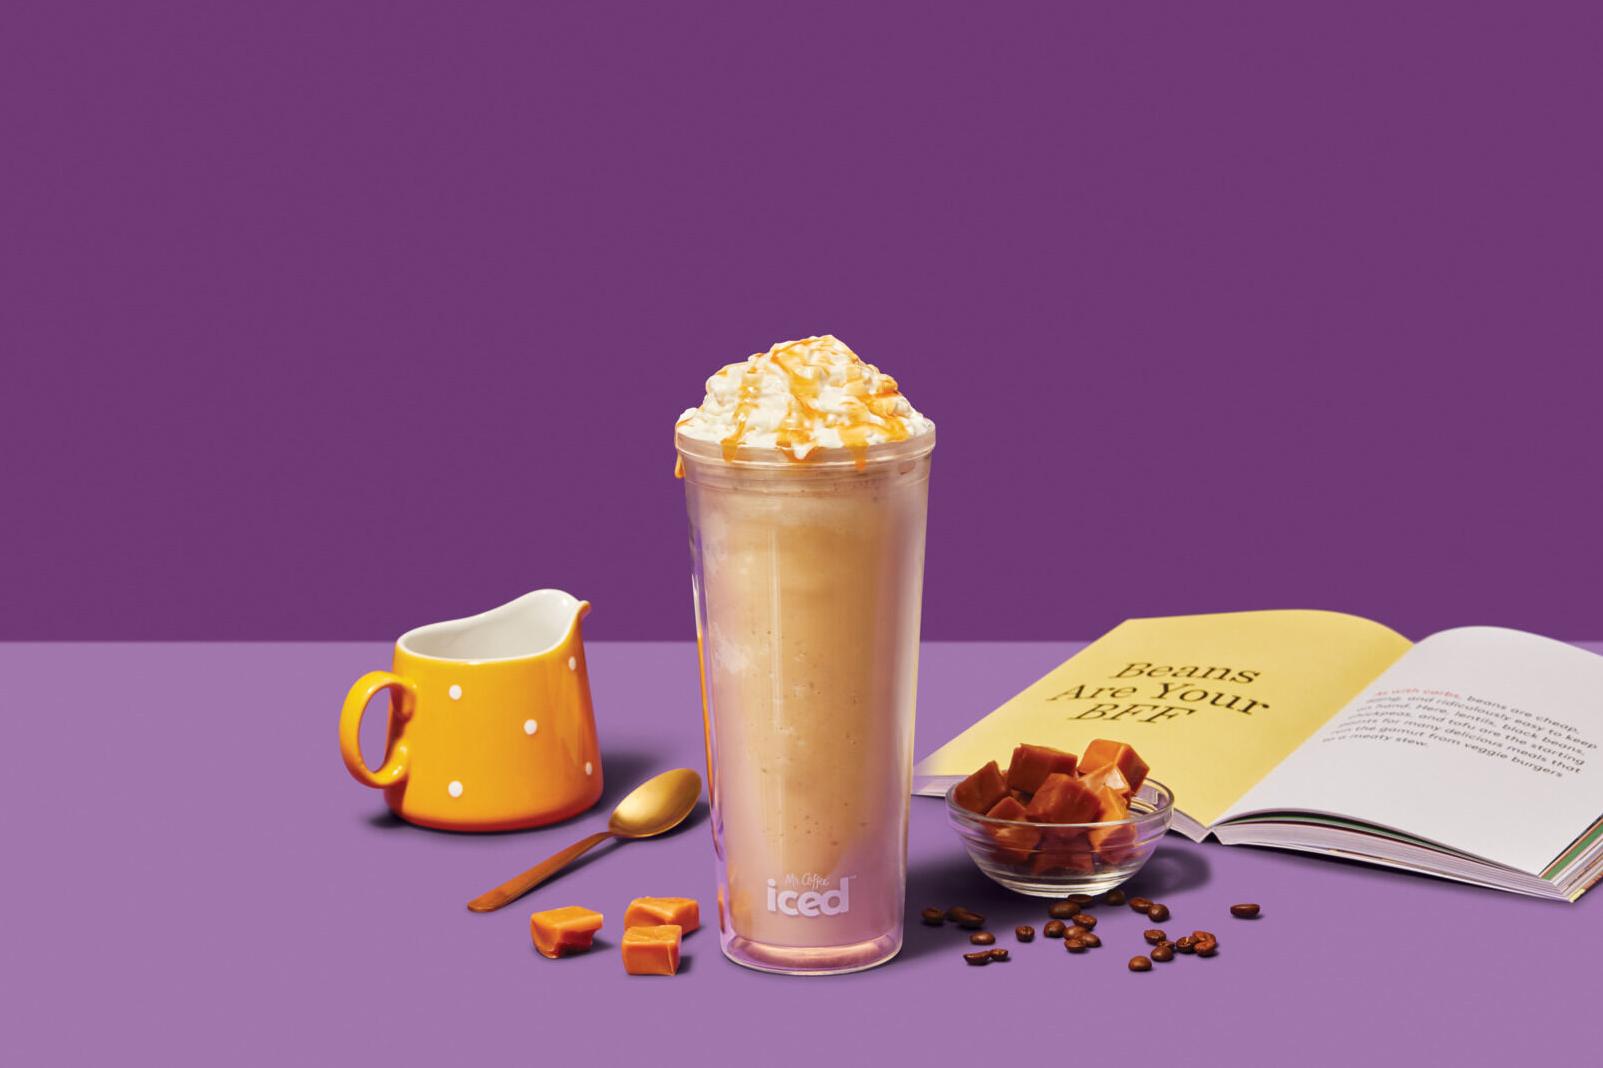  Satisfy your sweet tooth with this creamy caramel cappuccino frappe!